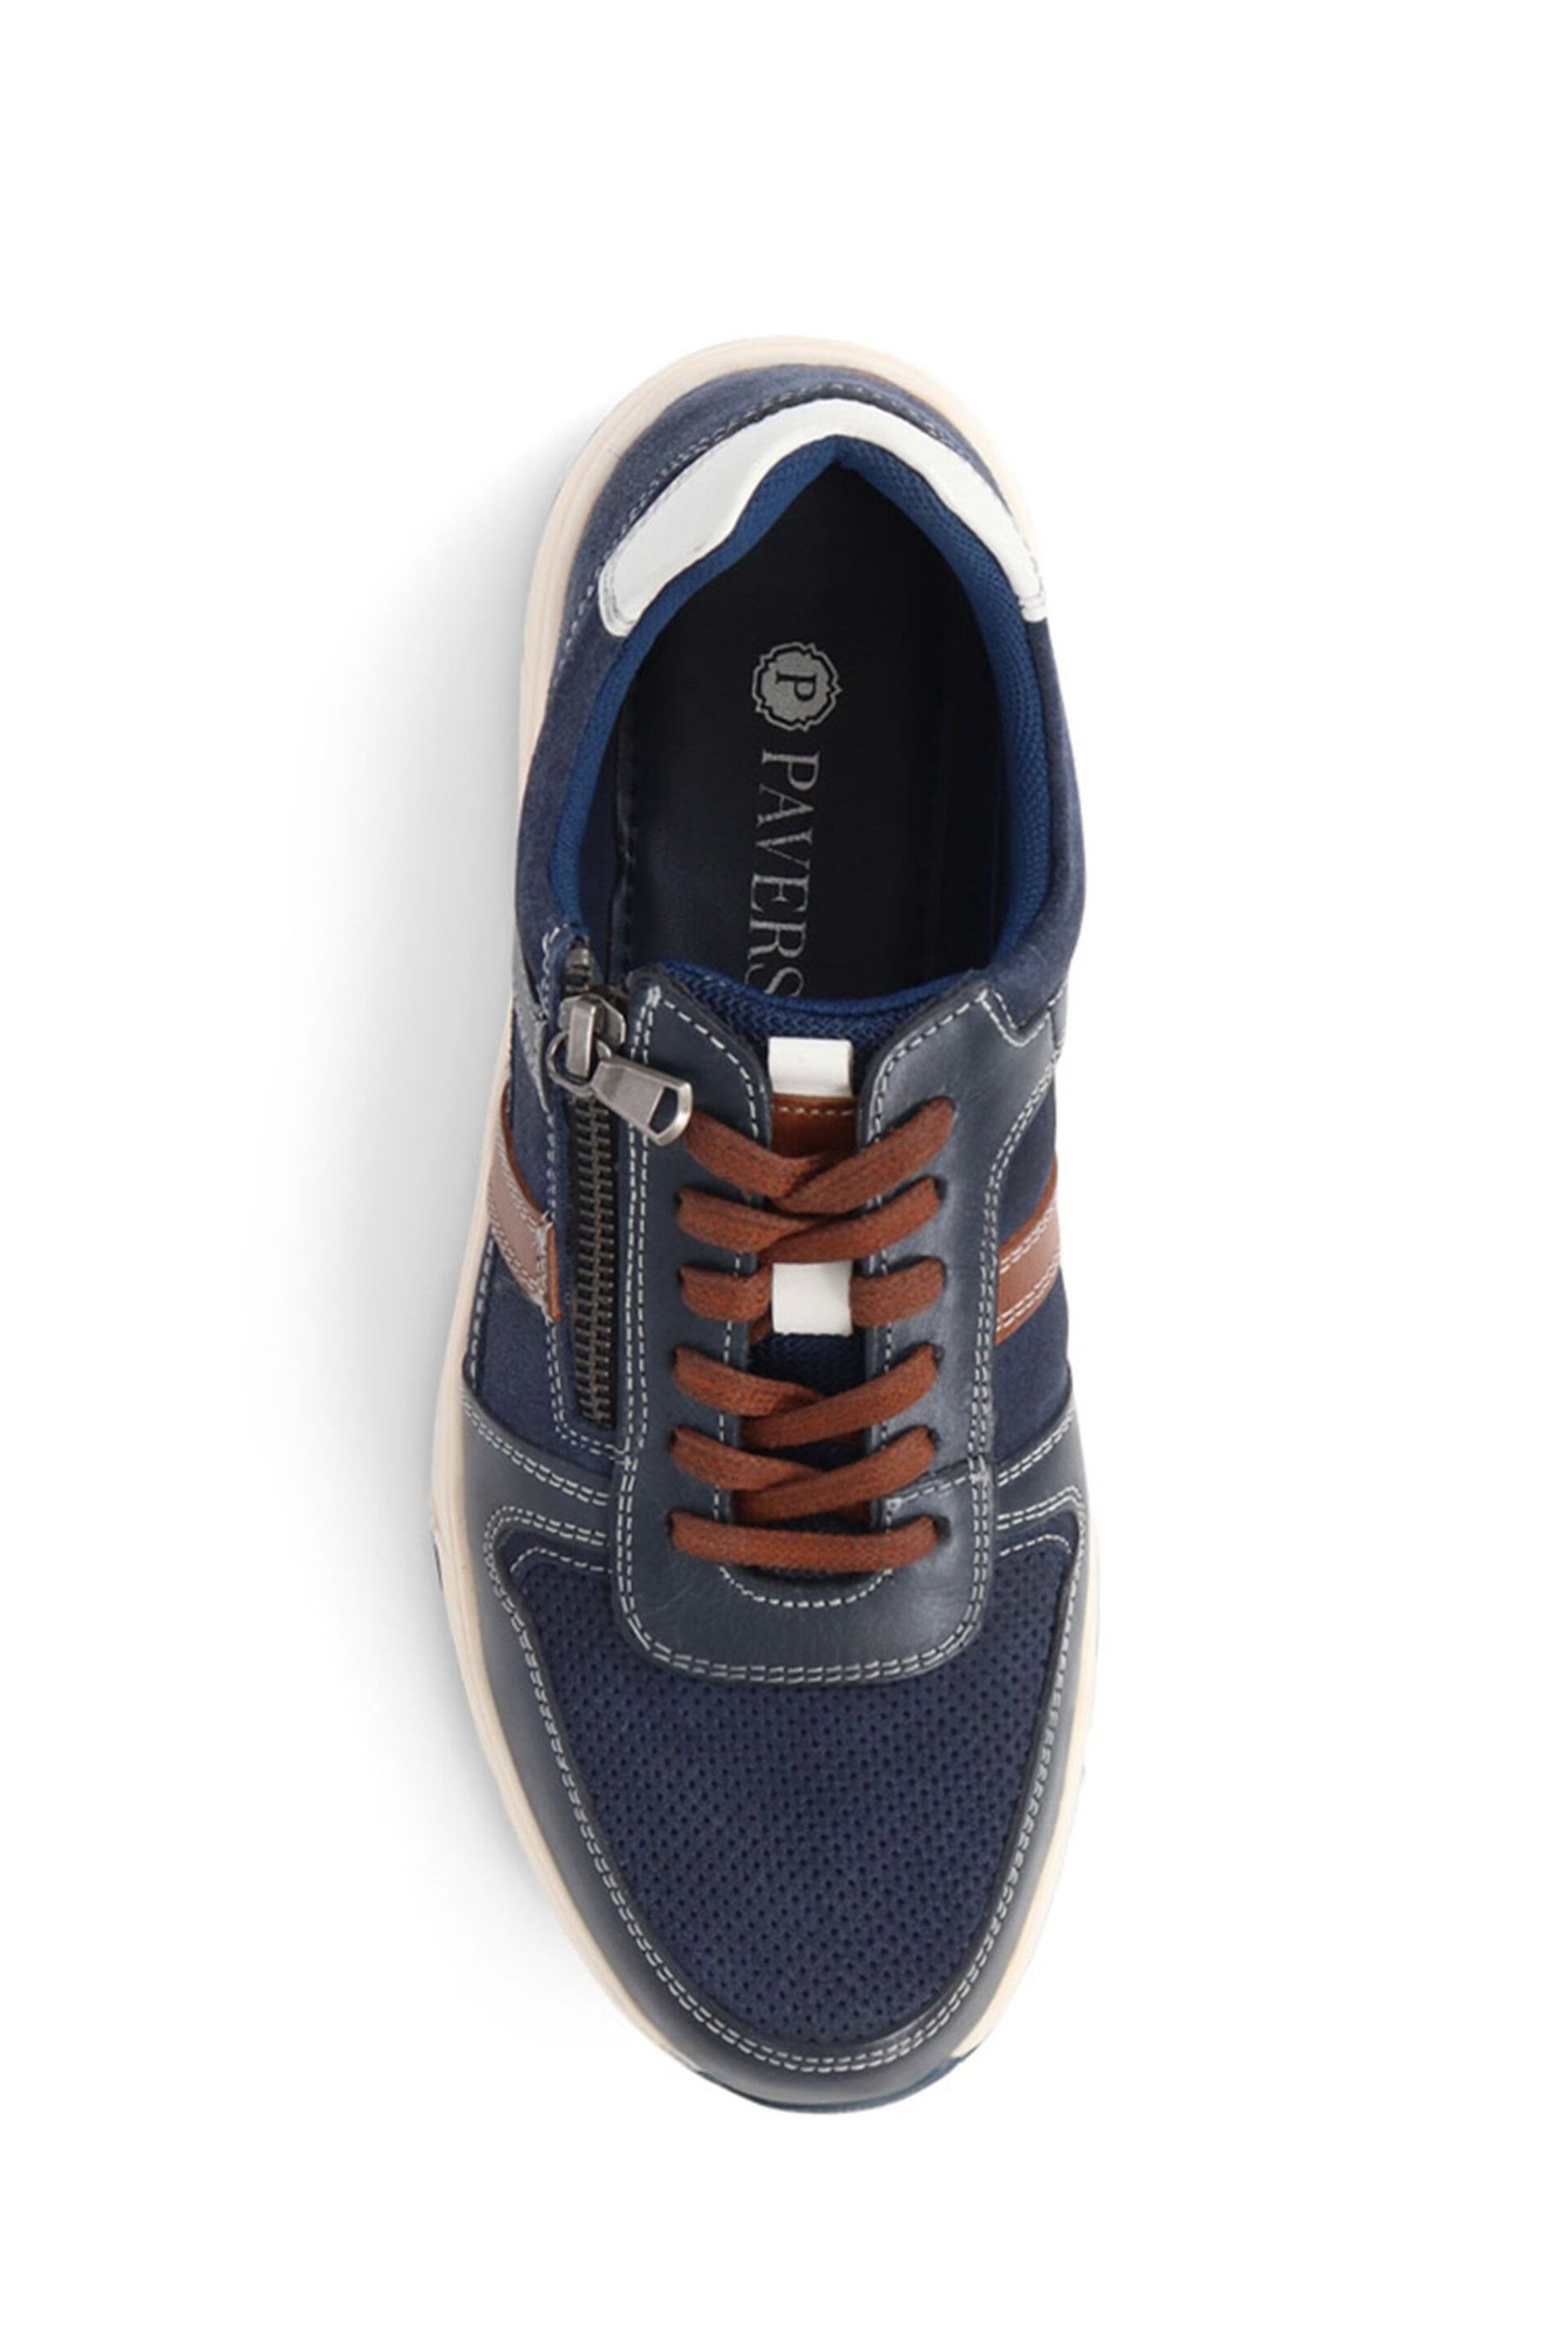 Pavers Blue Lace-Up Leather Trainers - Image 4 of 5